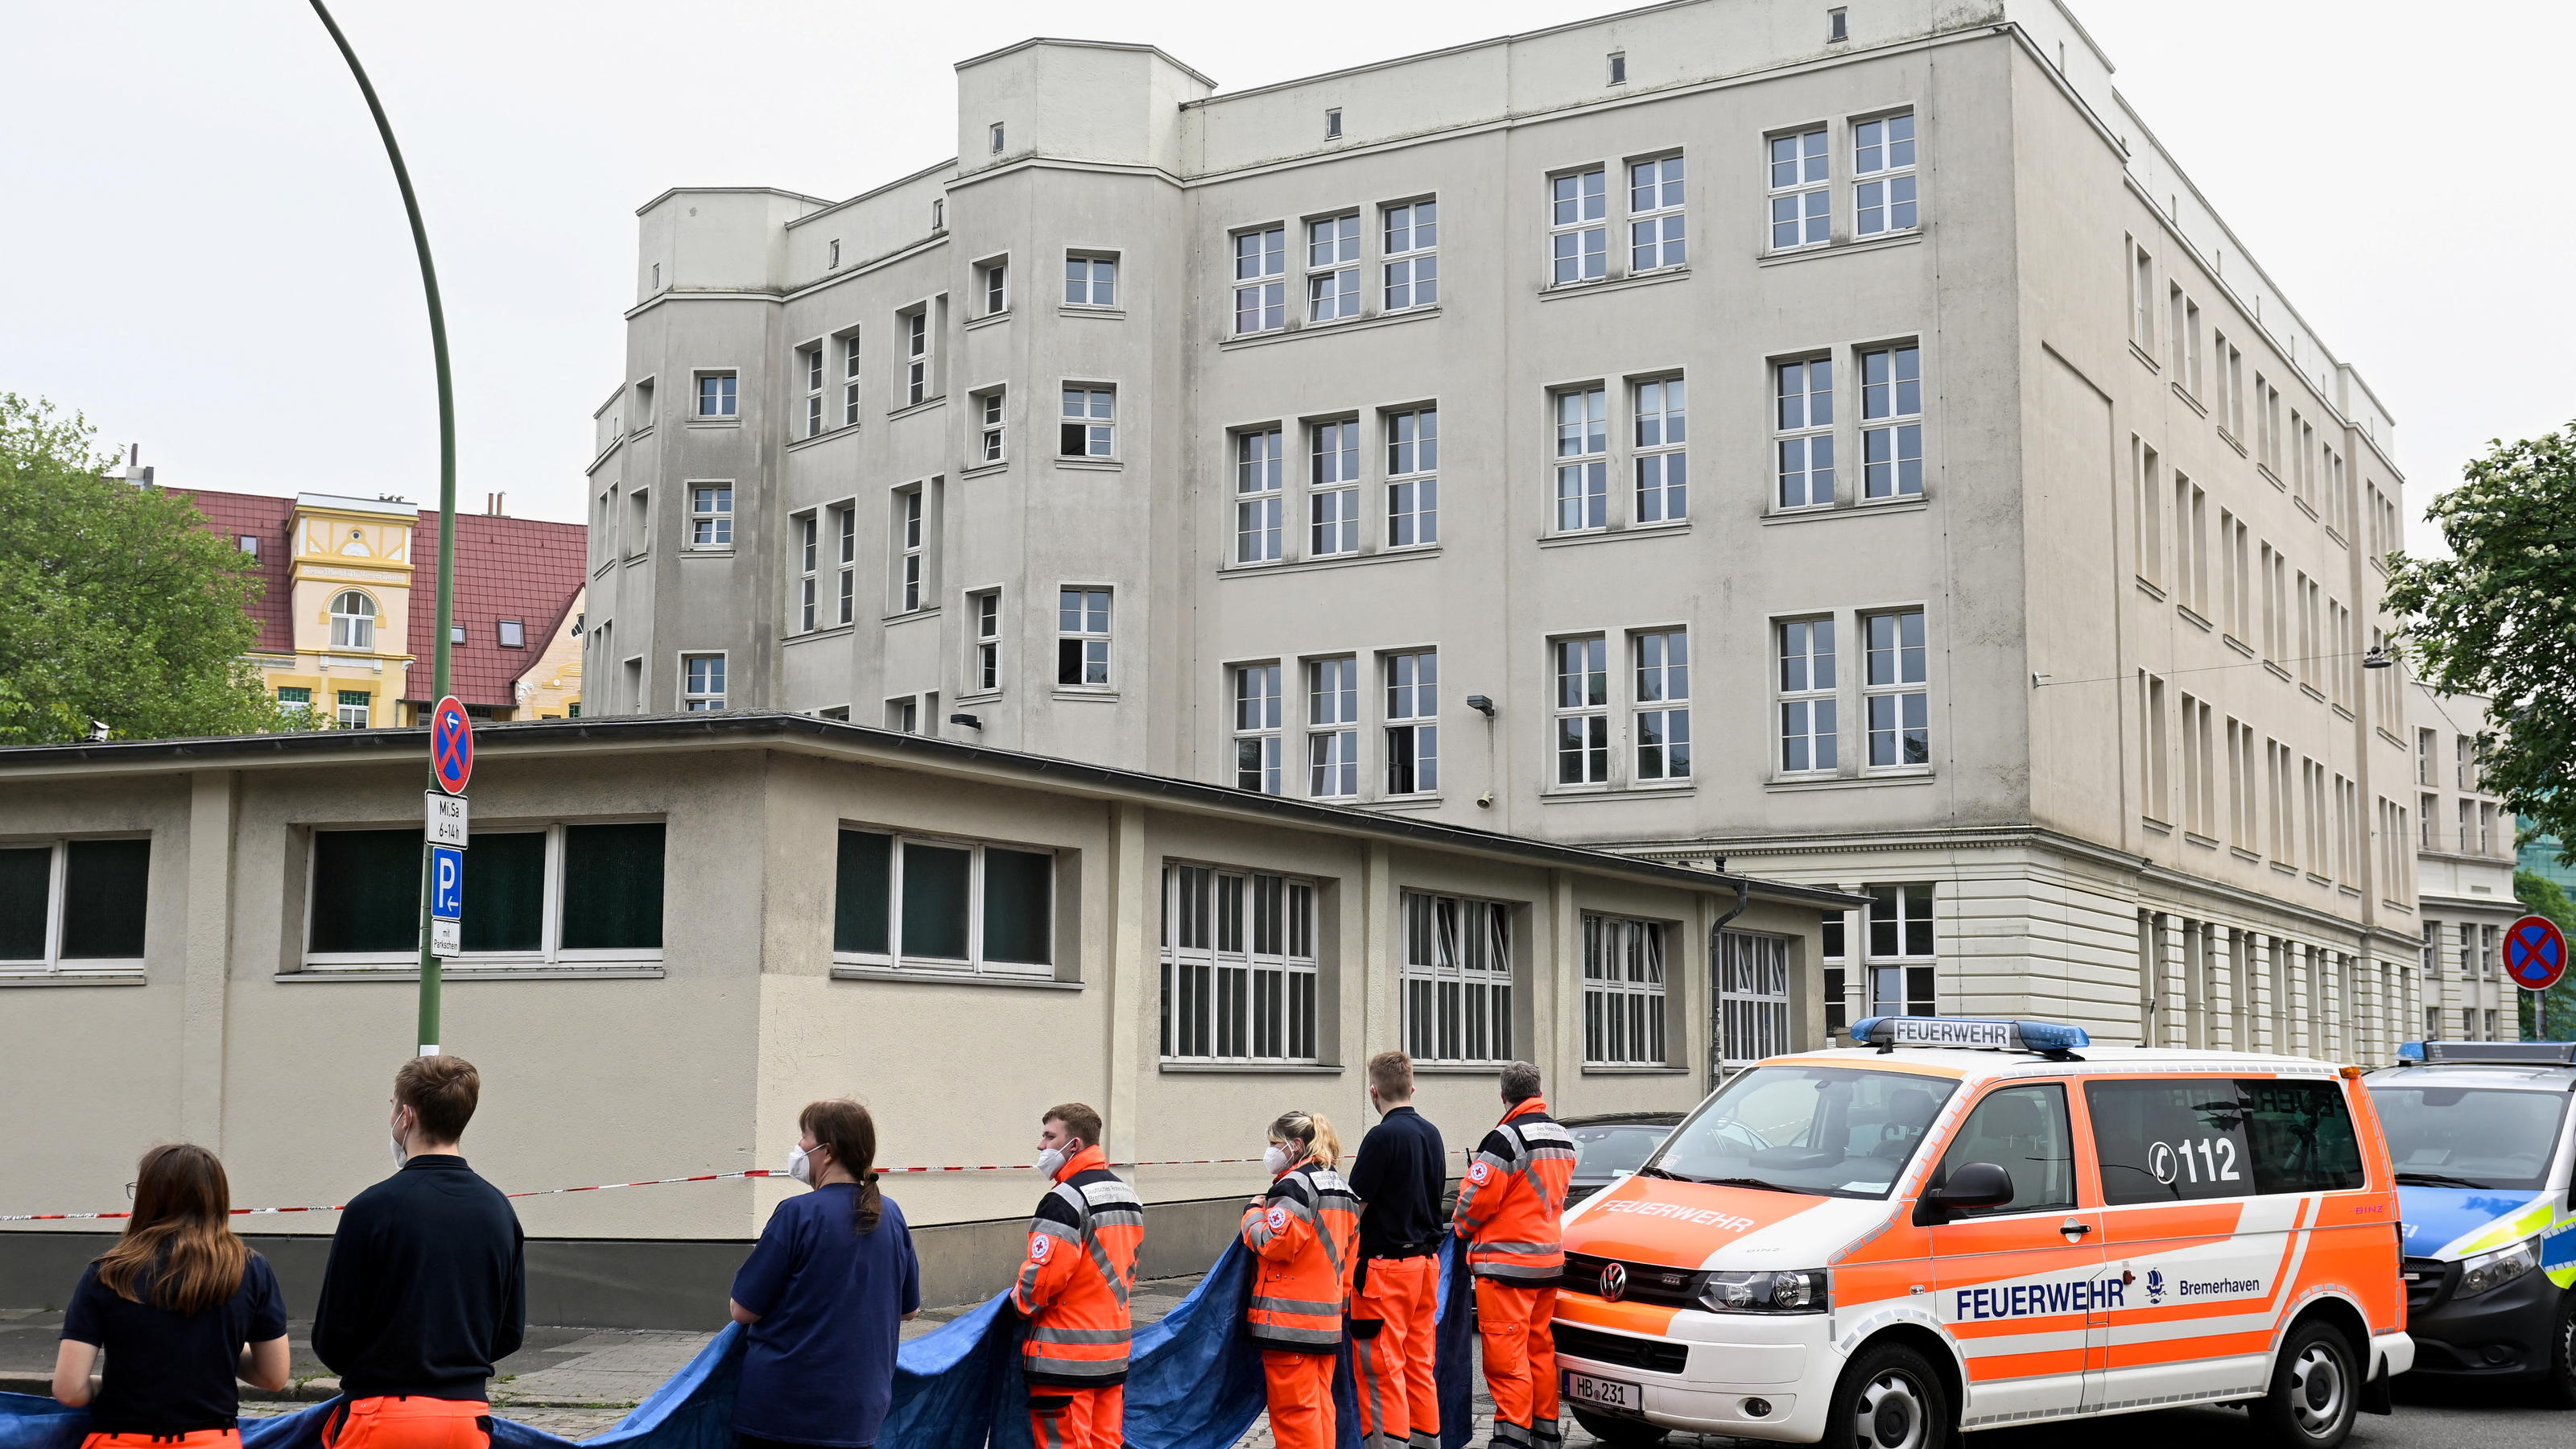 Emergency medical workers stand near a German school building where shots were fired, in the northern city of Bremerhaven, Germany, May 19, 2022. REUTERS/Fabian Bimmer